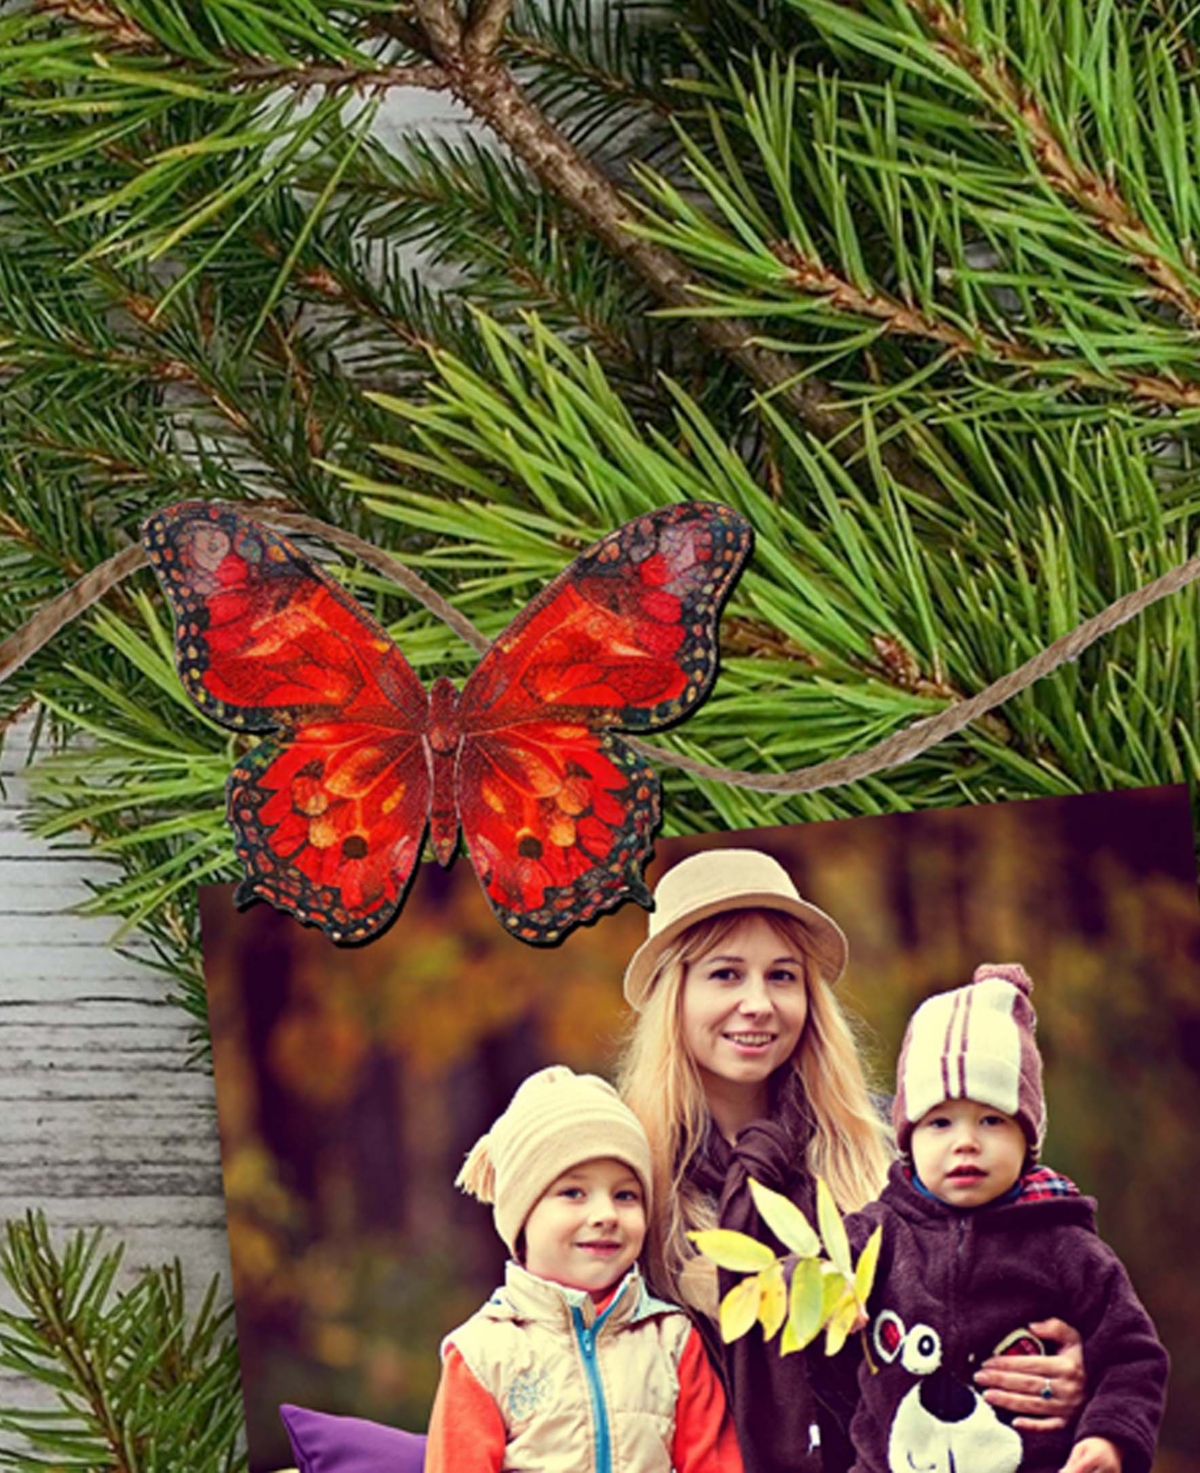 Shop Designocracy Holiday Wooden Clip-on Ornaments Butterfly Set Of 6 G. Debrekht In Multi Color